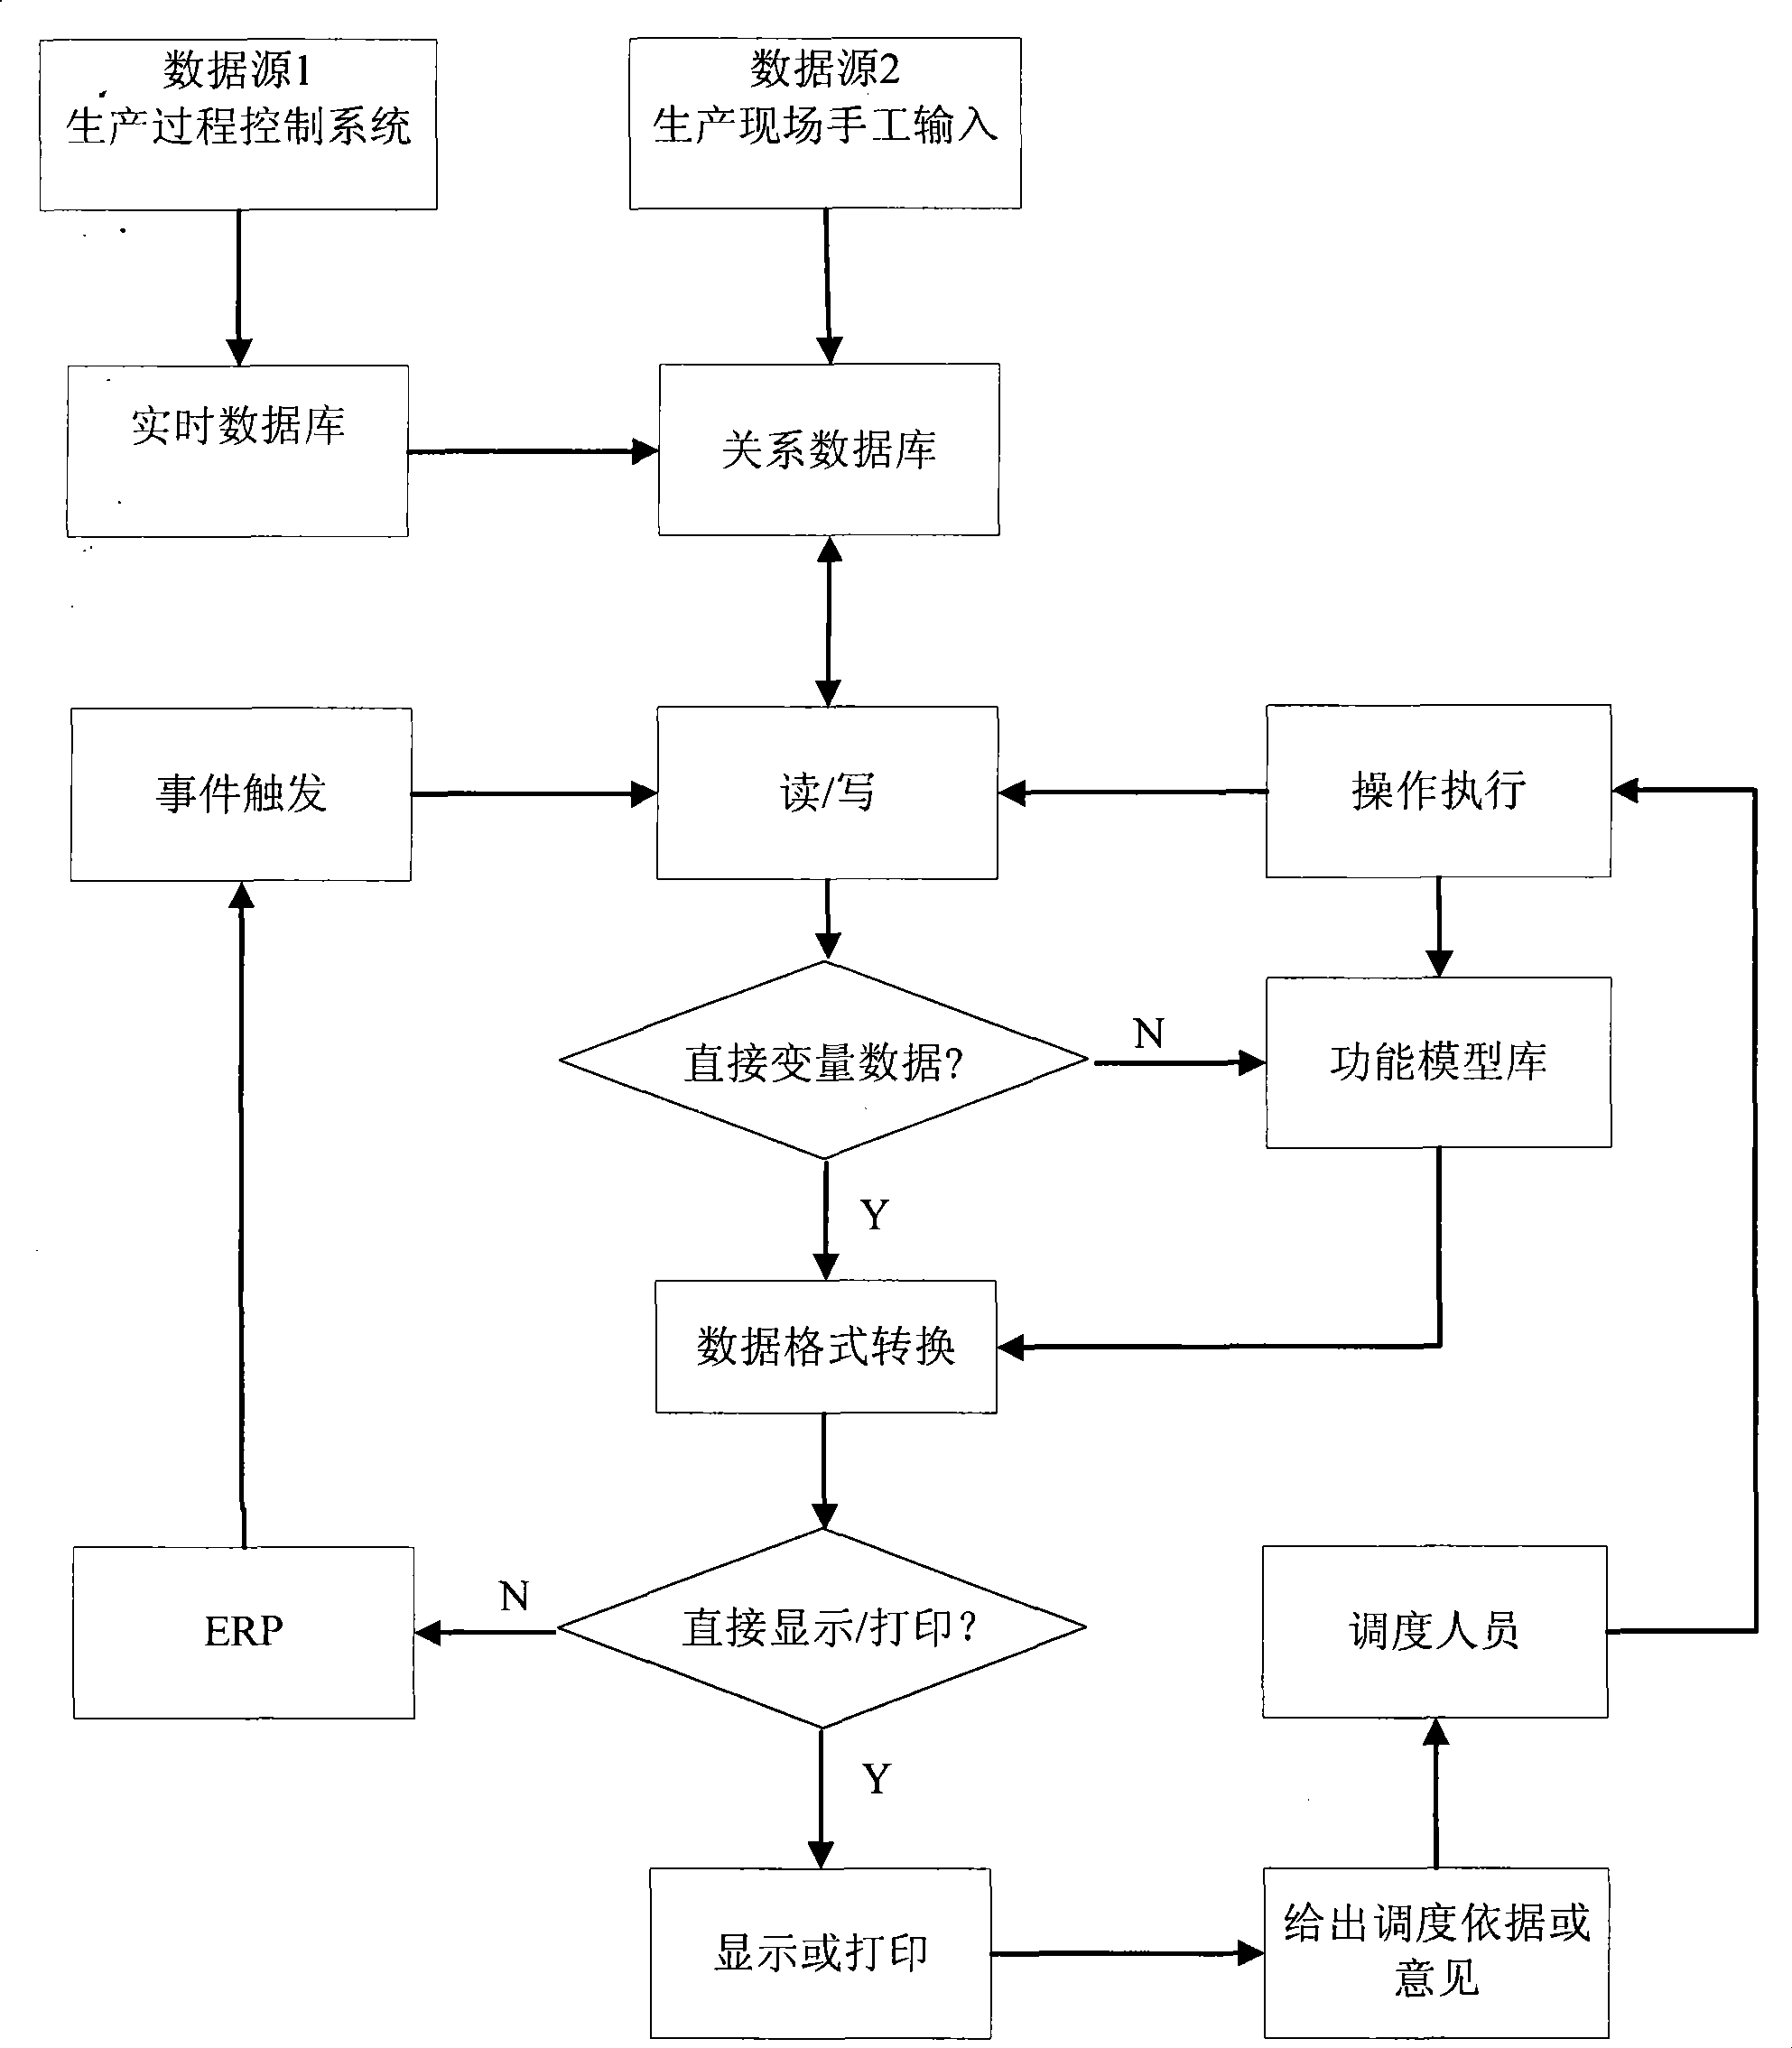 Synthesis optimizing and scheduling system of energy system